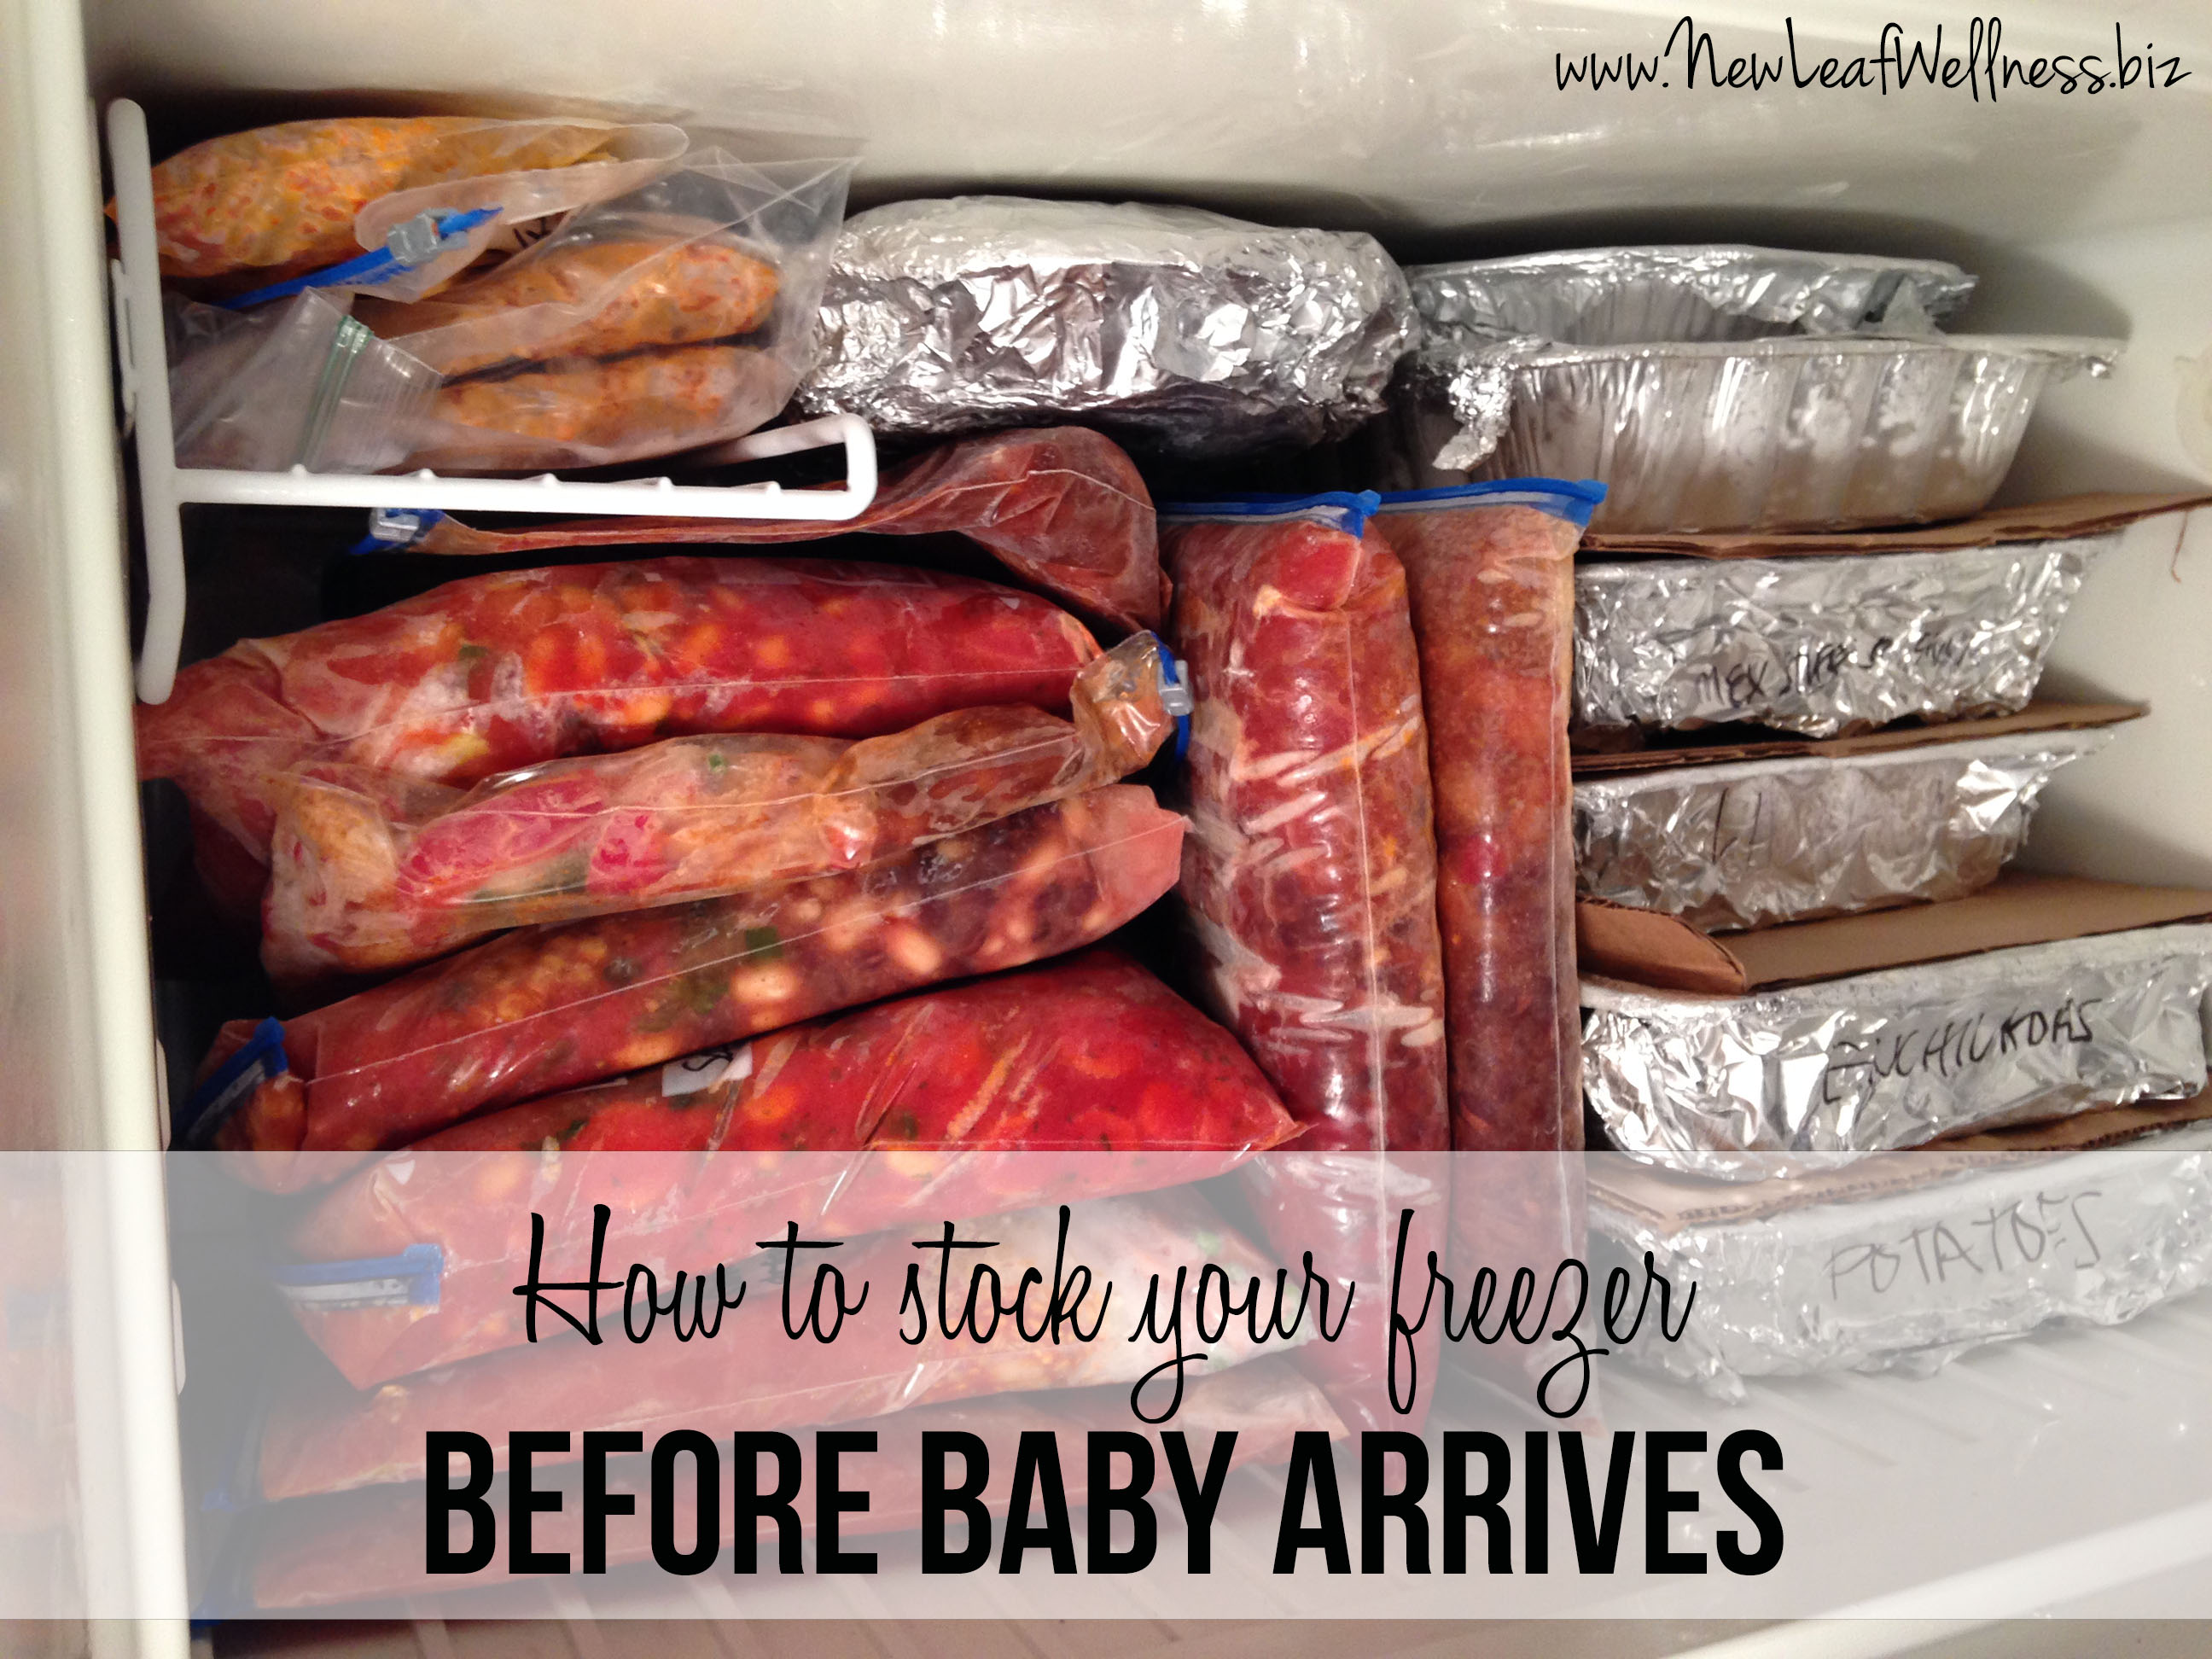 How to stock your freezer before baby arrives